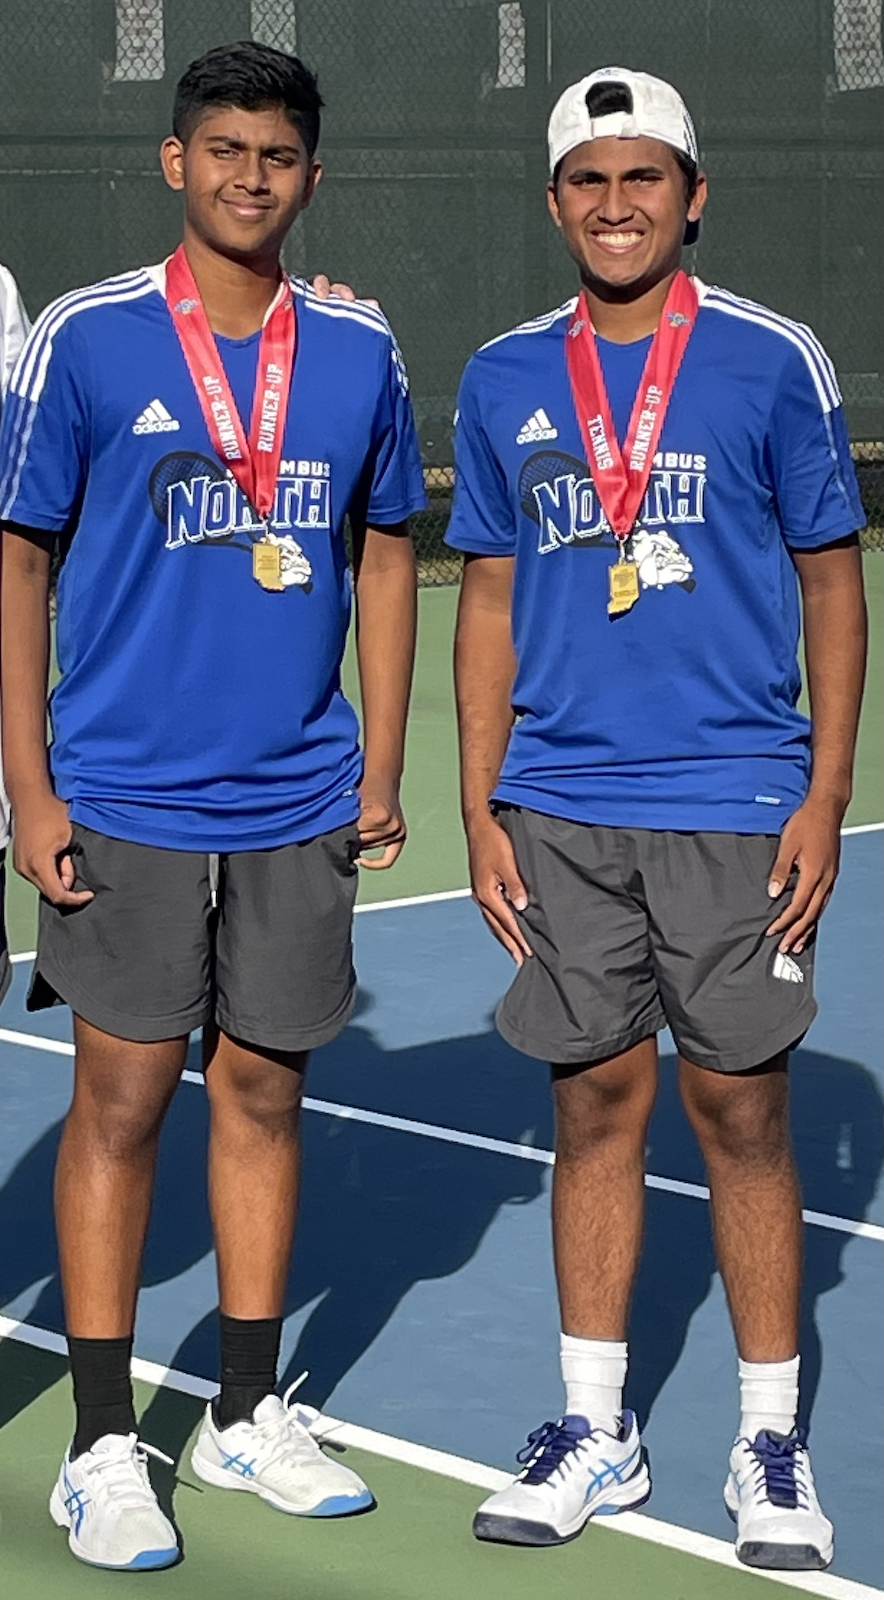 Tennis duo runners up at State Finals cover photo